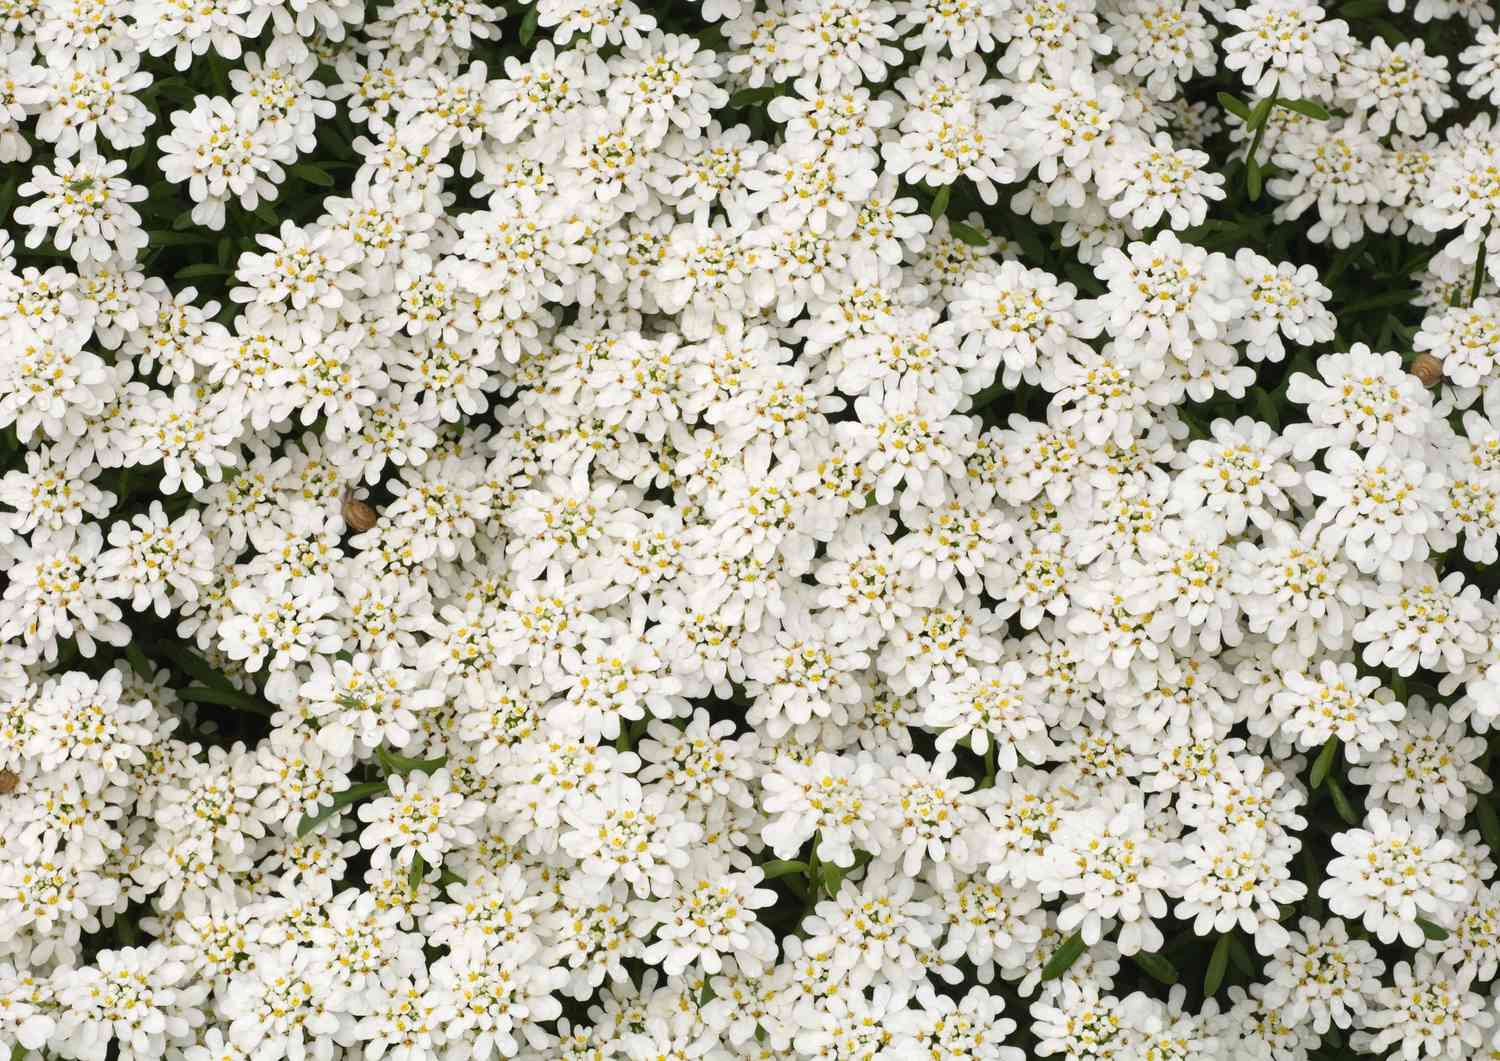 Candytuft flowers growing in a mass.